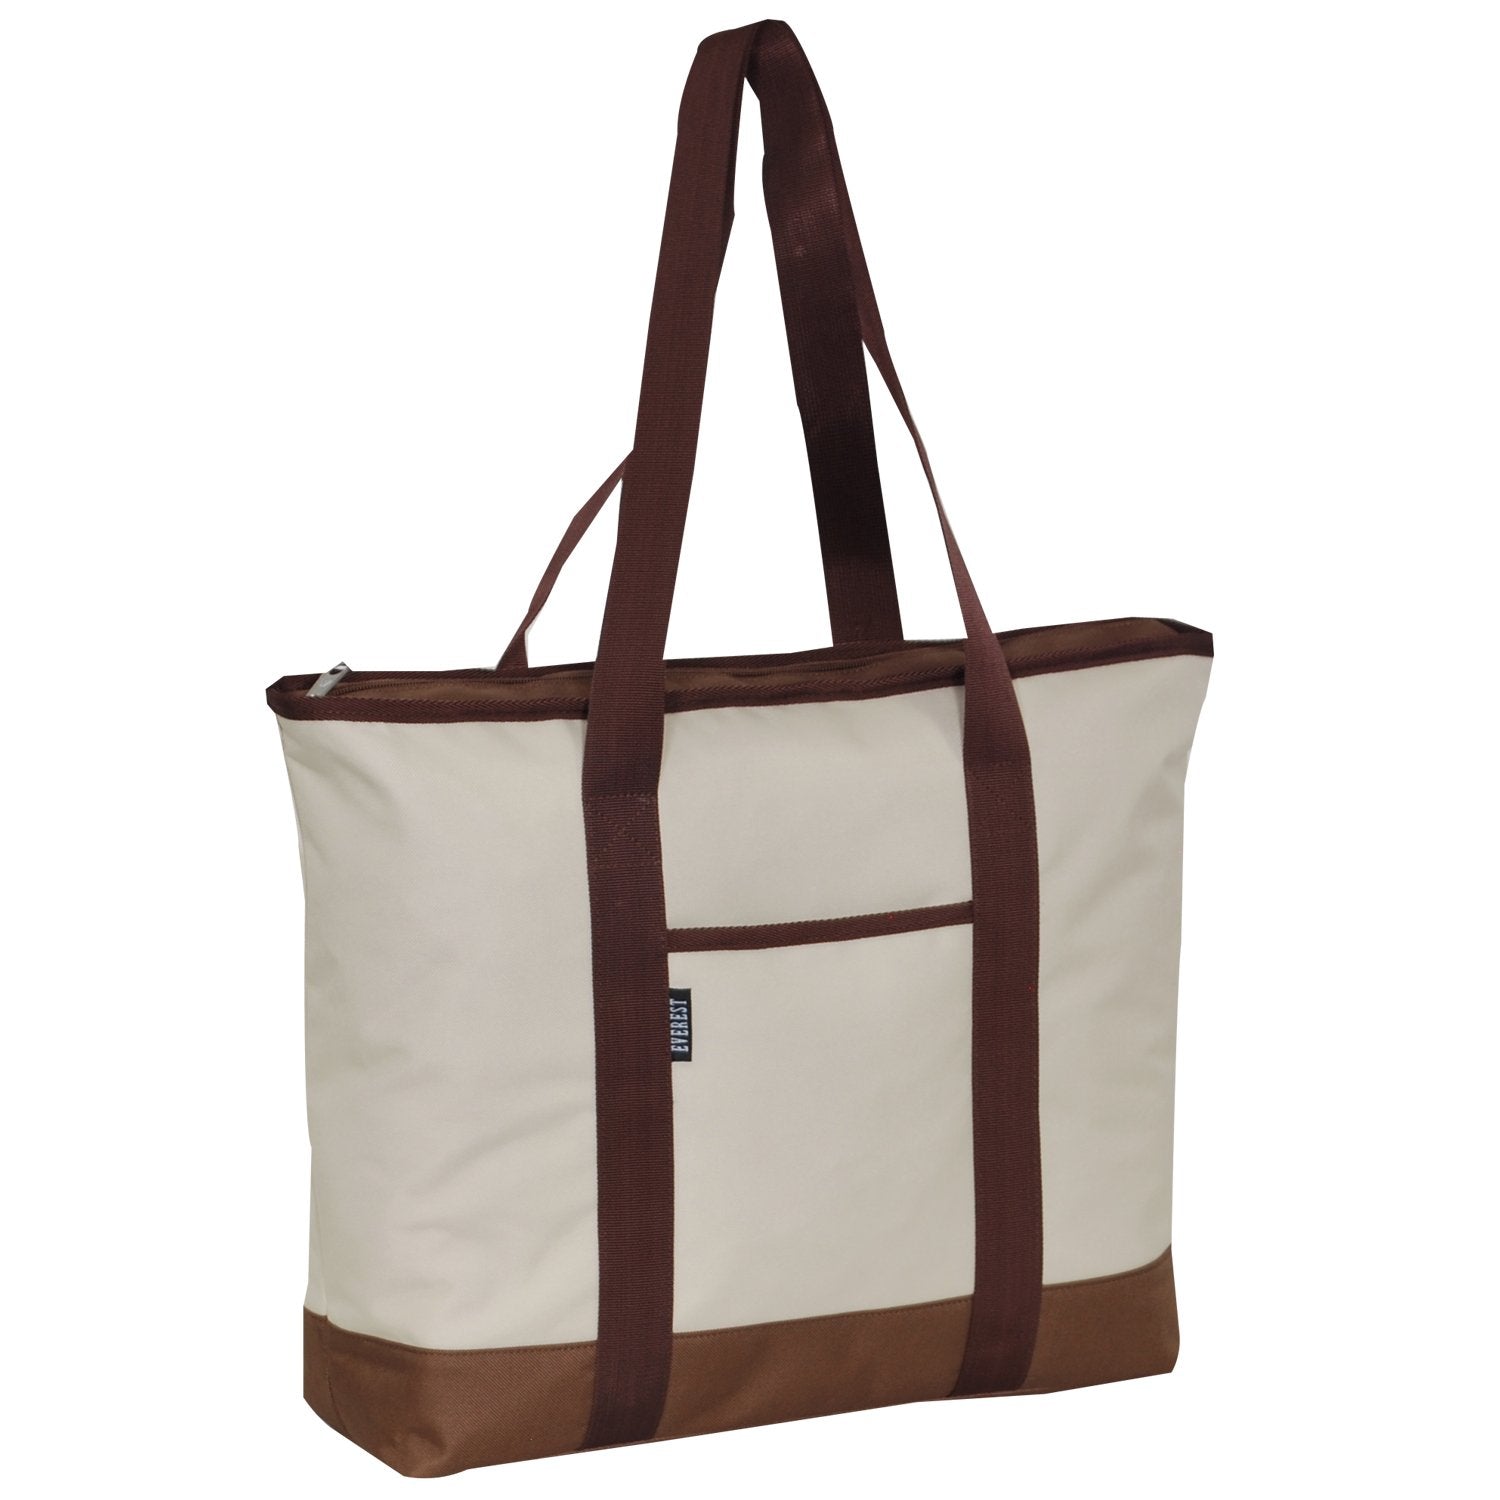 Everest-Shopping Tote-eSafety Supplies, Inc